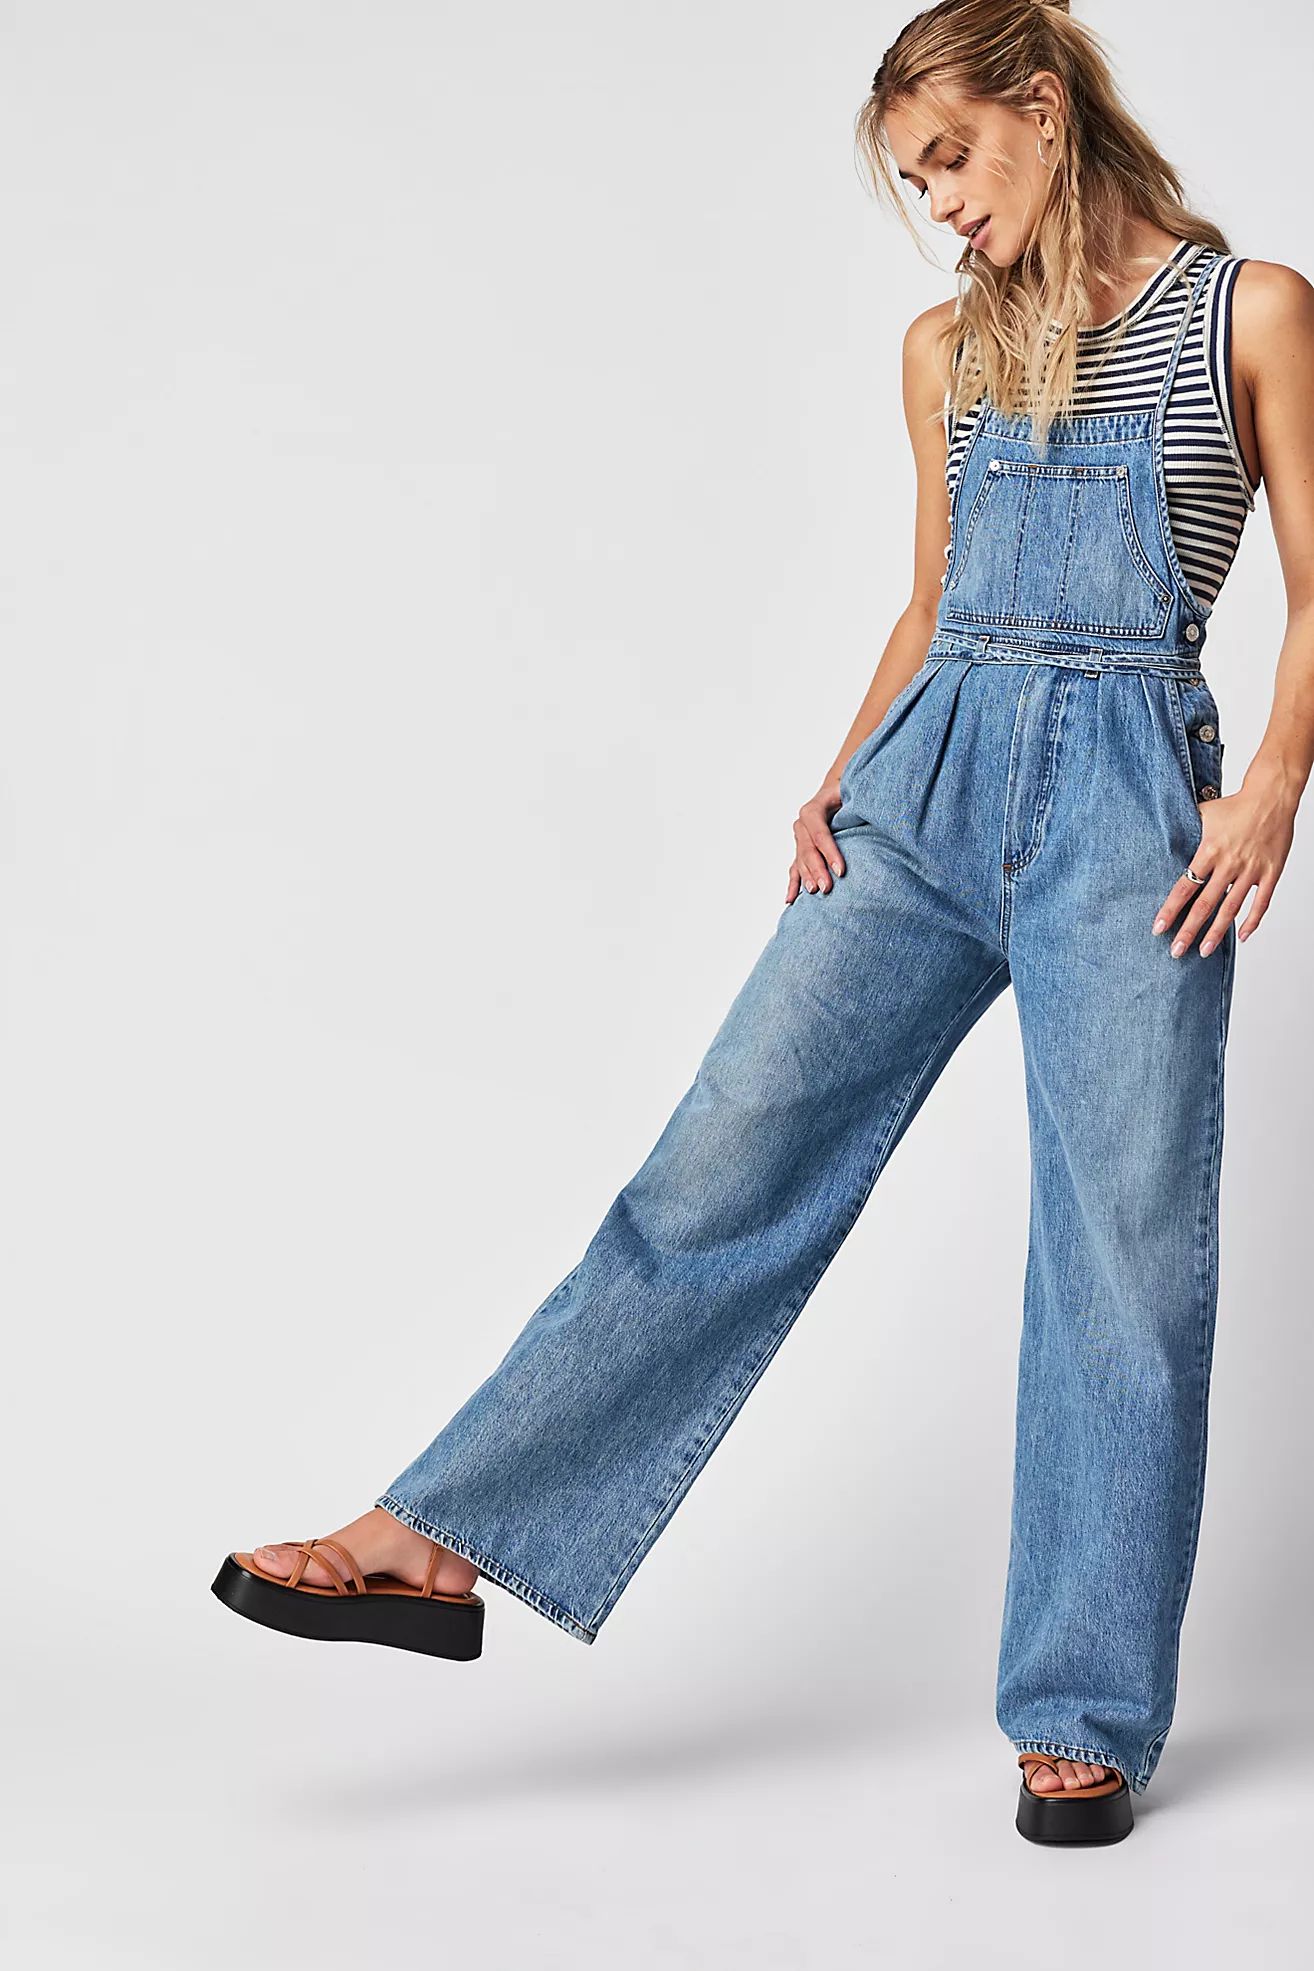 Citizens of Humanity Mallory Overalls | Free People (Global - UK&FR Excluded)